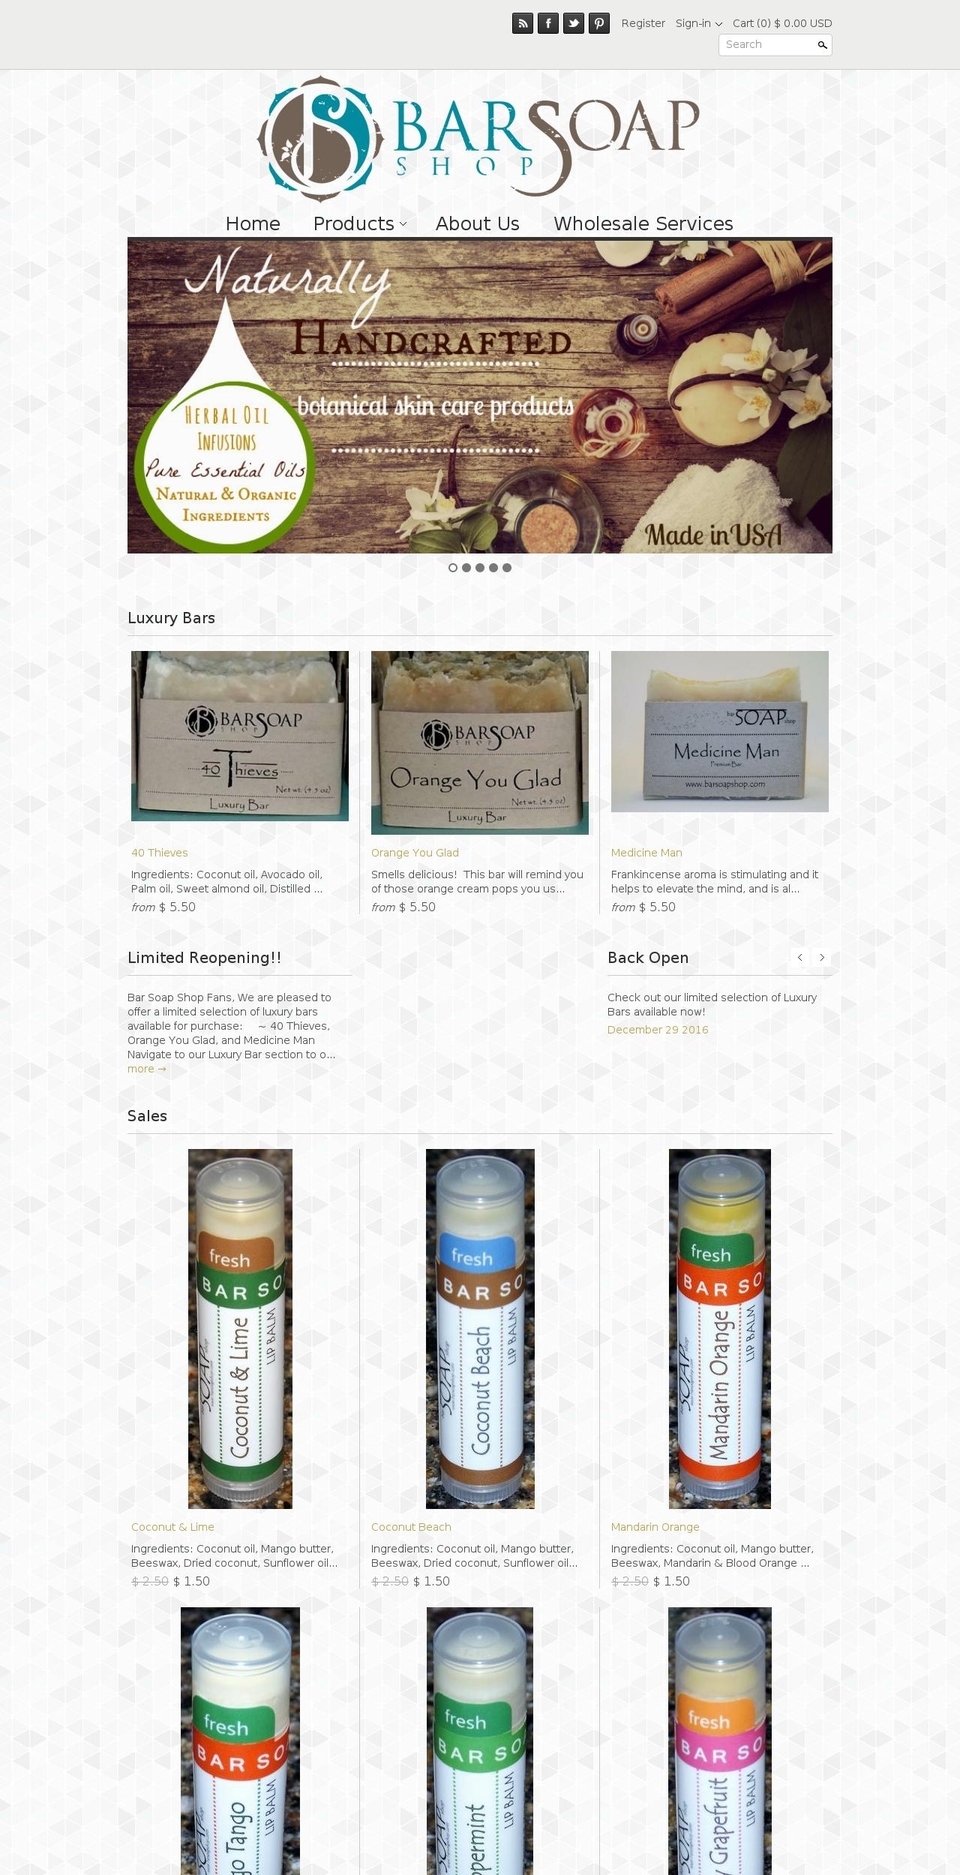 Clean Shopify theme site example barsoapshop.com